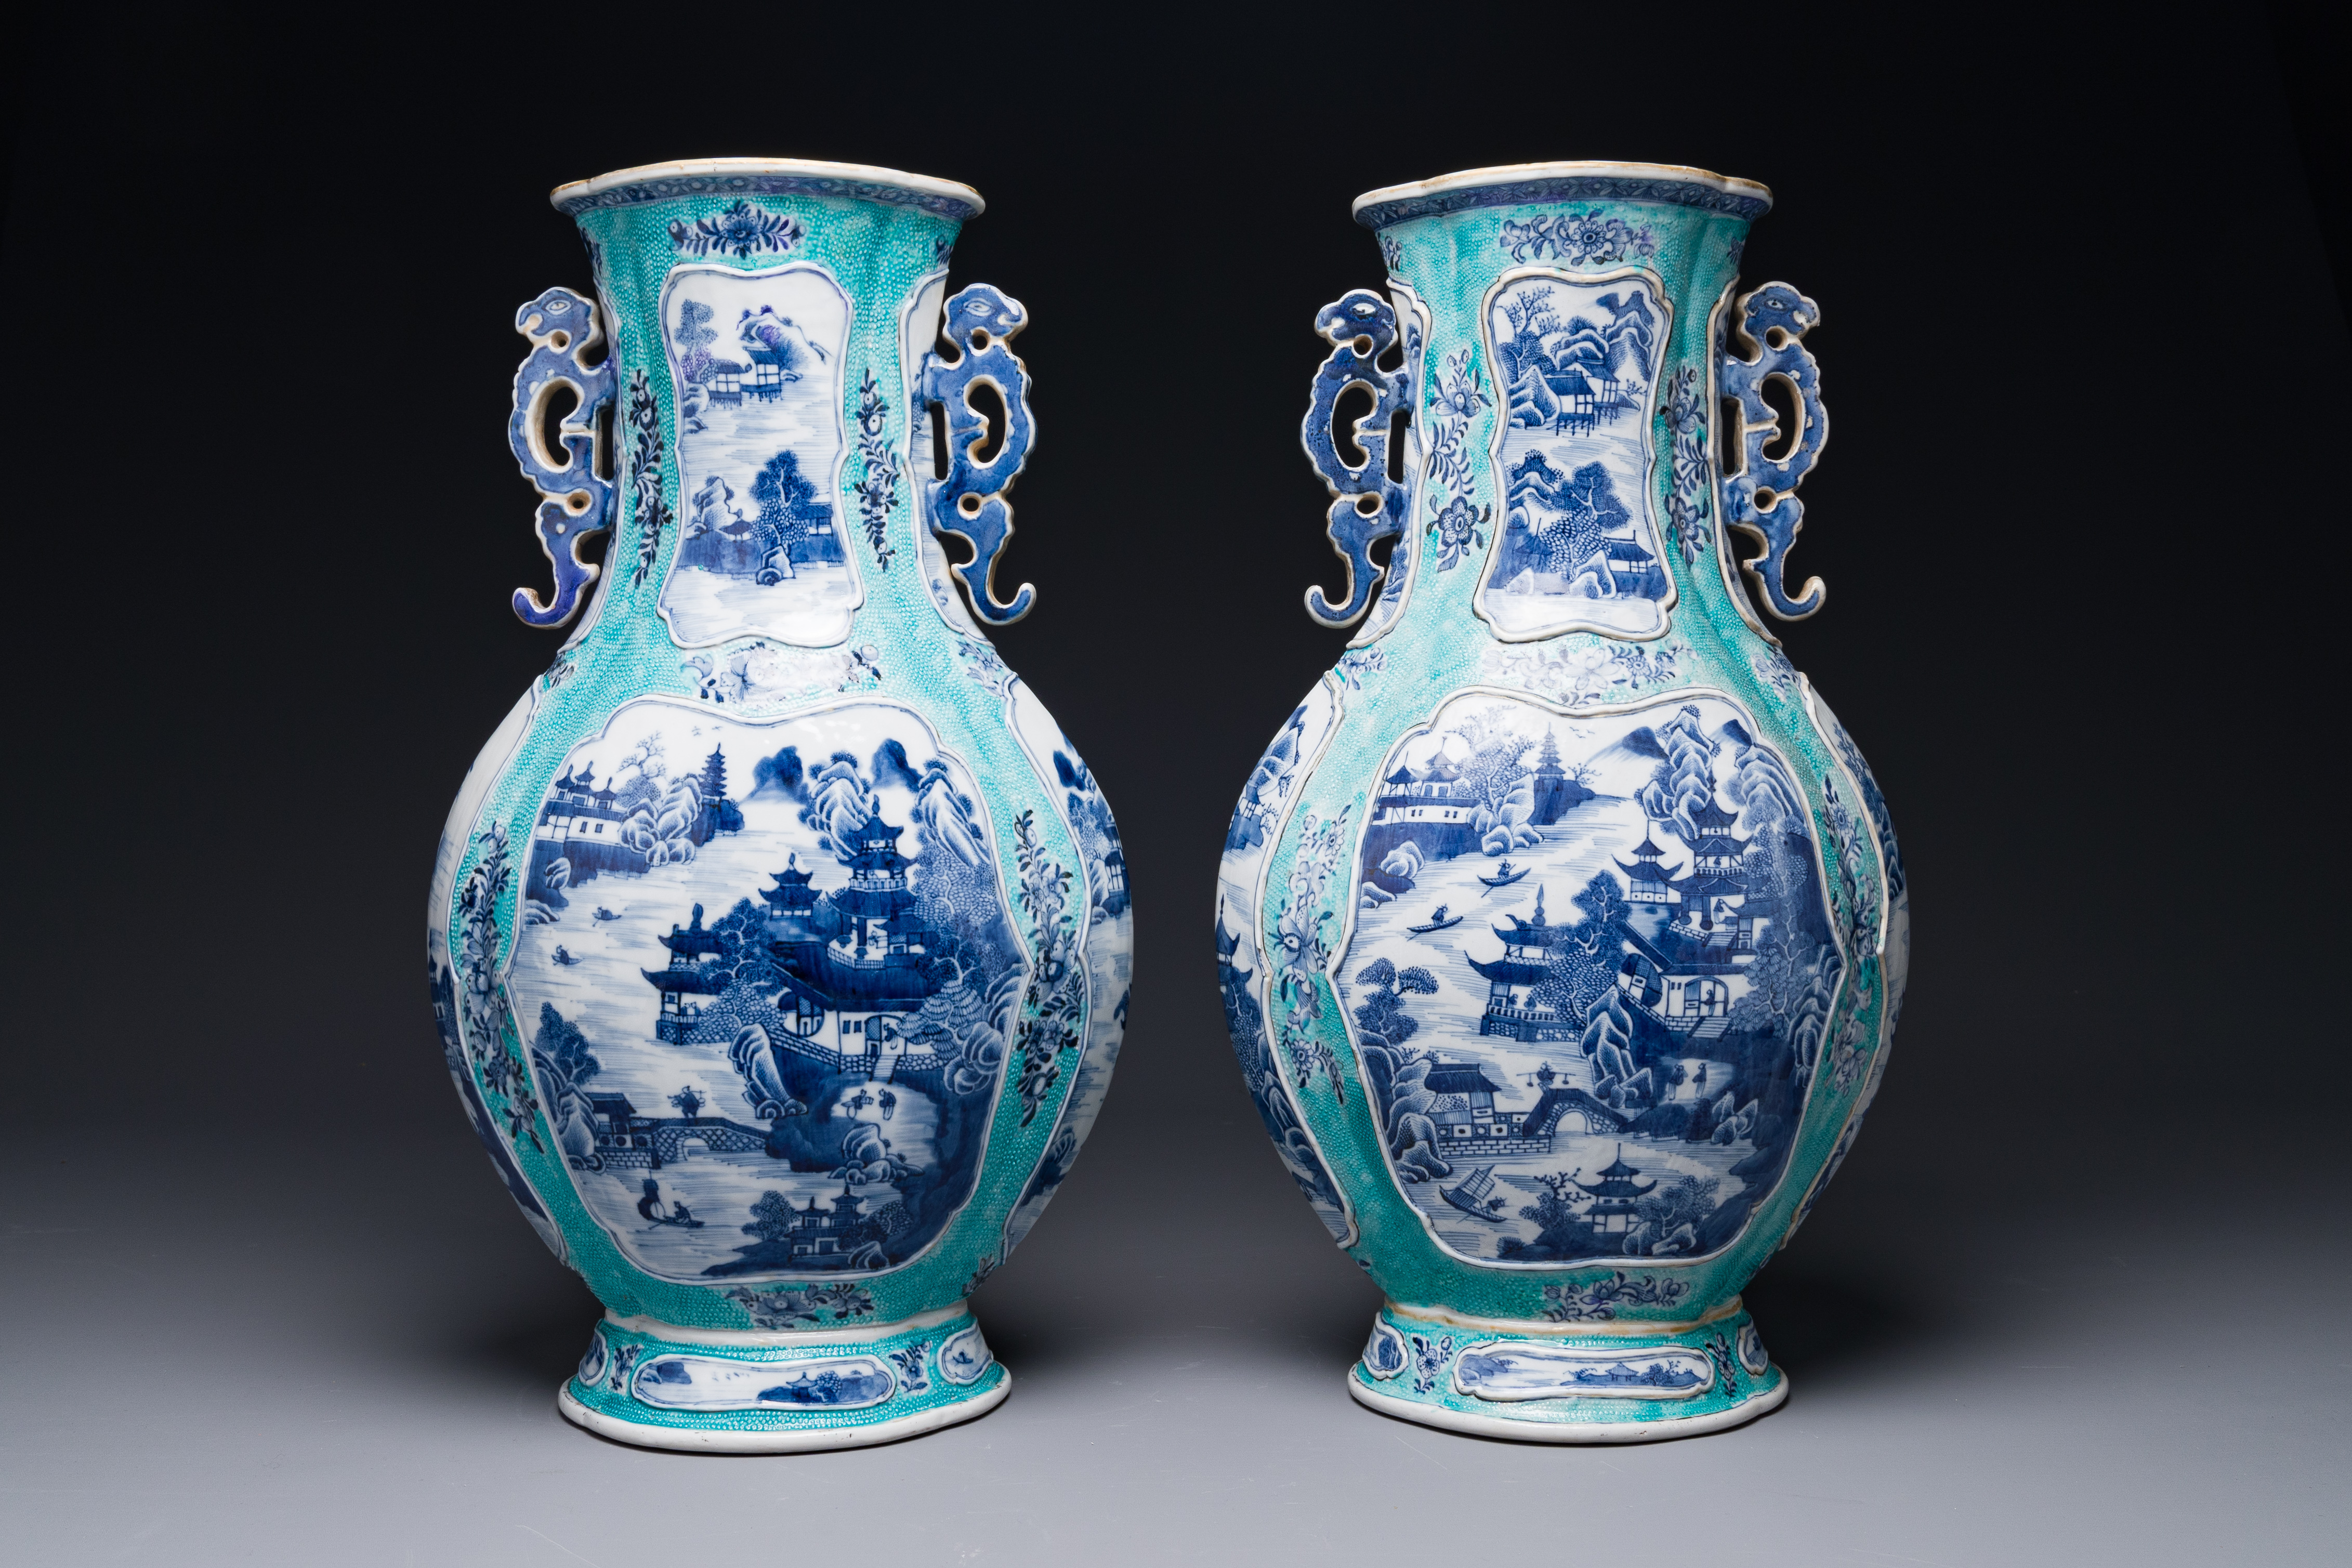 A pair of Chinese turquoise-ground blue and white vases depicting the Whampoa Pagoda and the Pearl R - Image 3 of 6